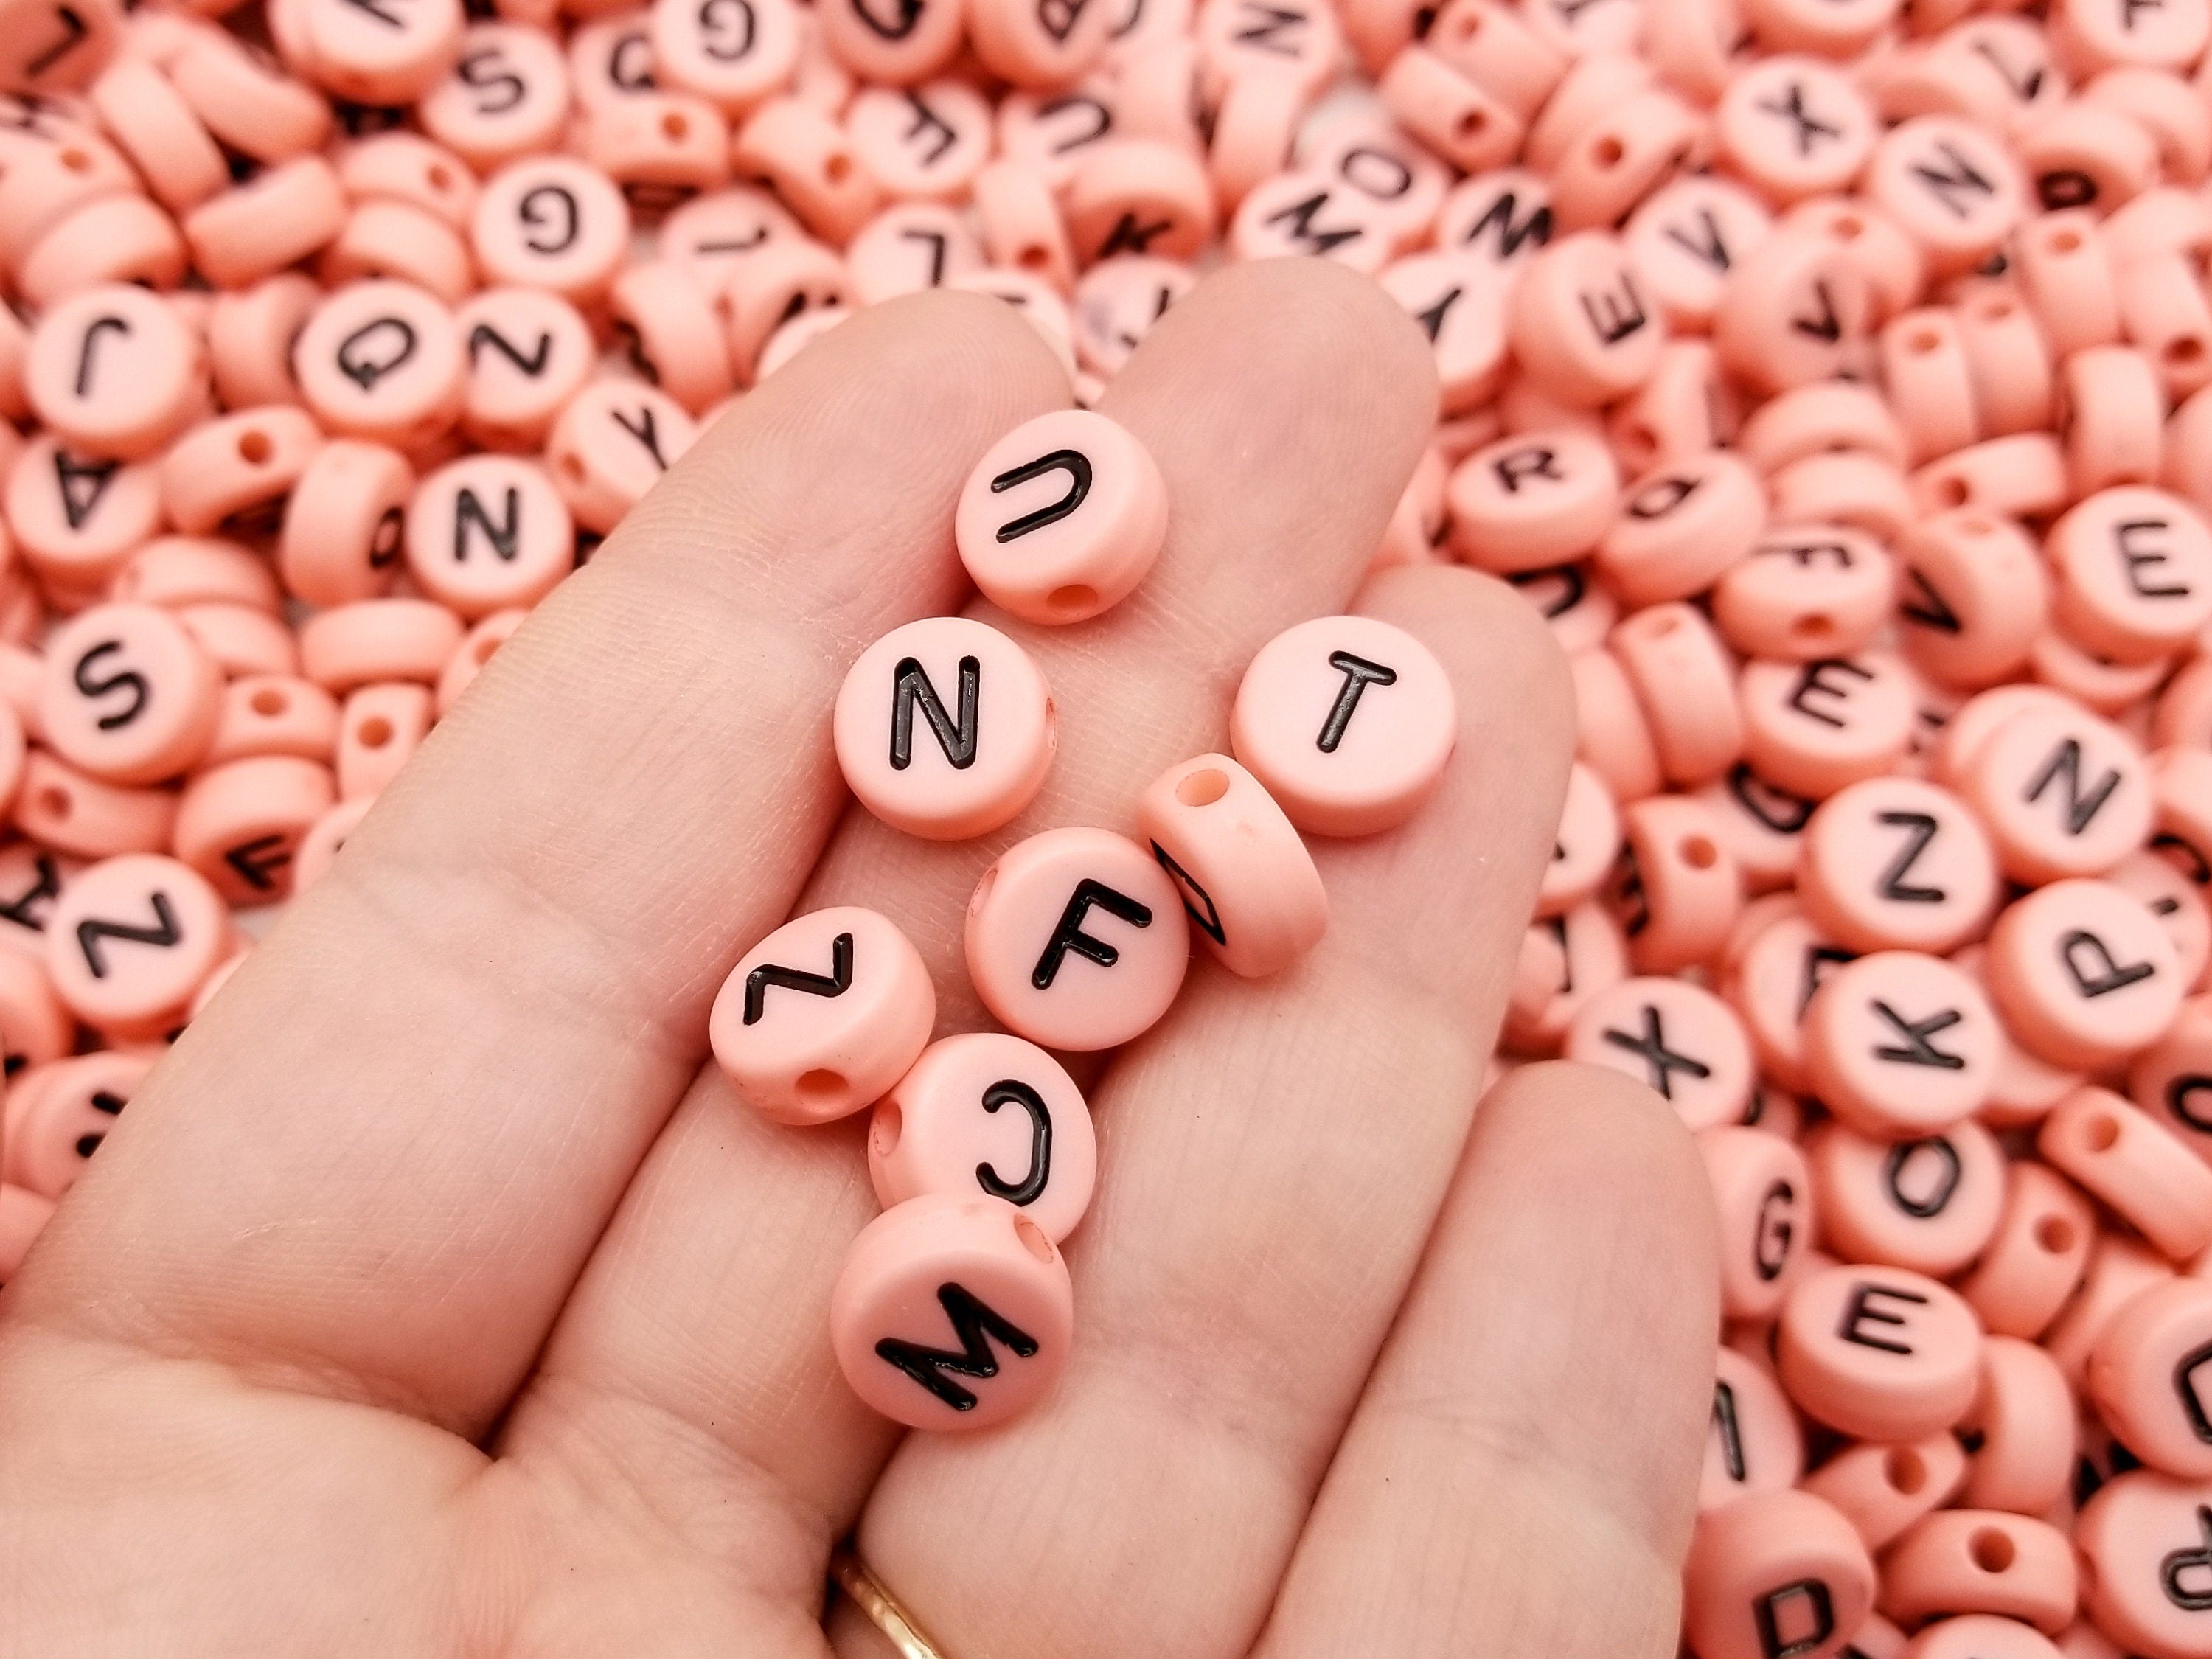 100 Pink and Black 7mm Alphabet Beads, Acrylic Pastel Pink Letter